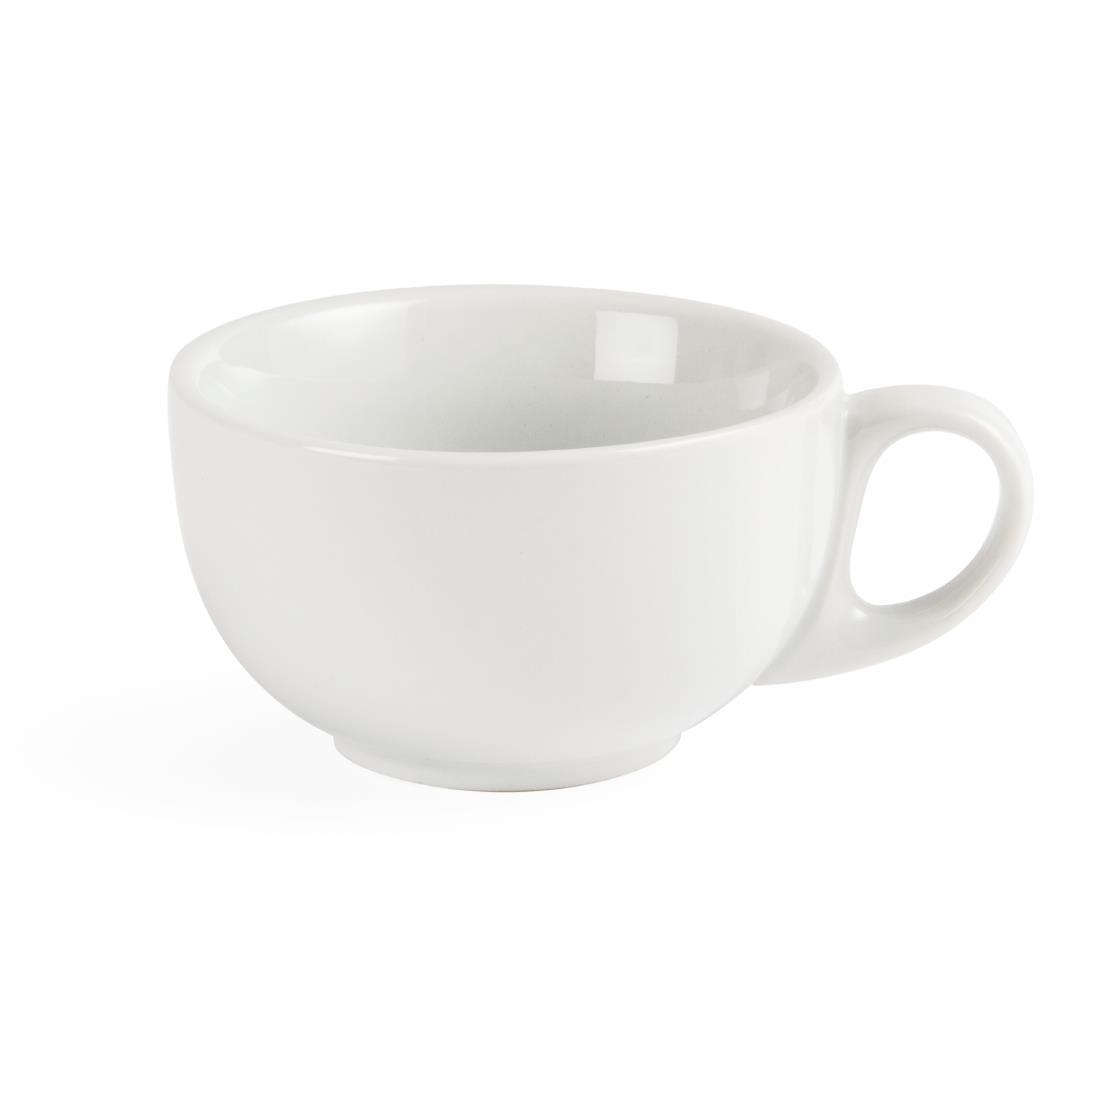 Olympia Whiteware Cappuccino Cups 200ml 7oz (Pack of 12) - CB469  - 2